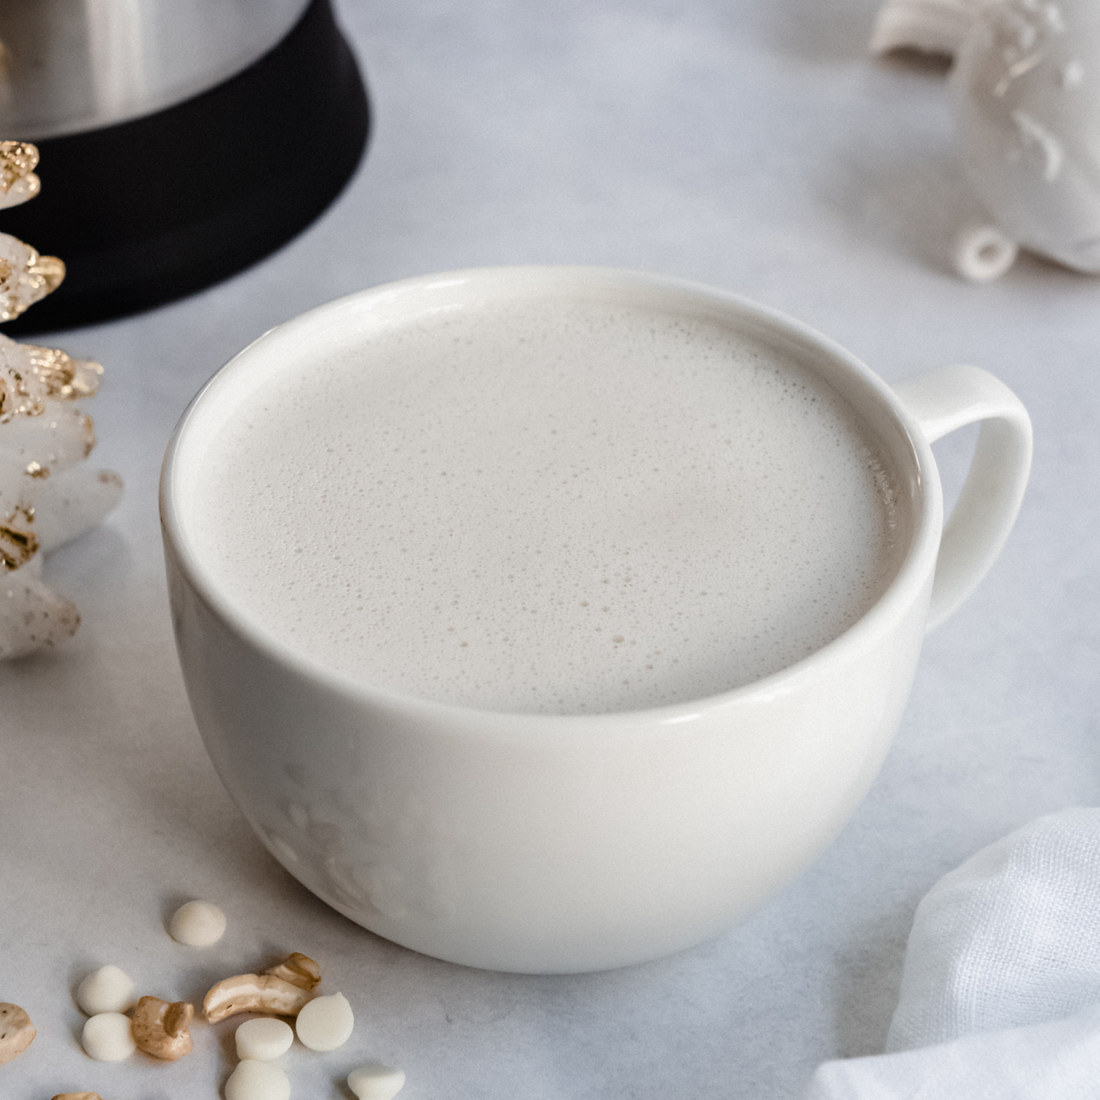 vegan white hot chocolate made in the Almond Cow